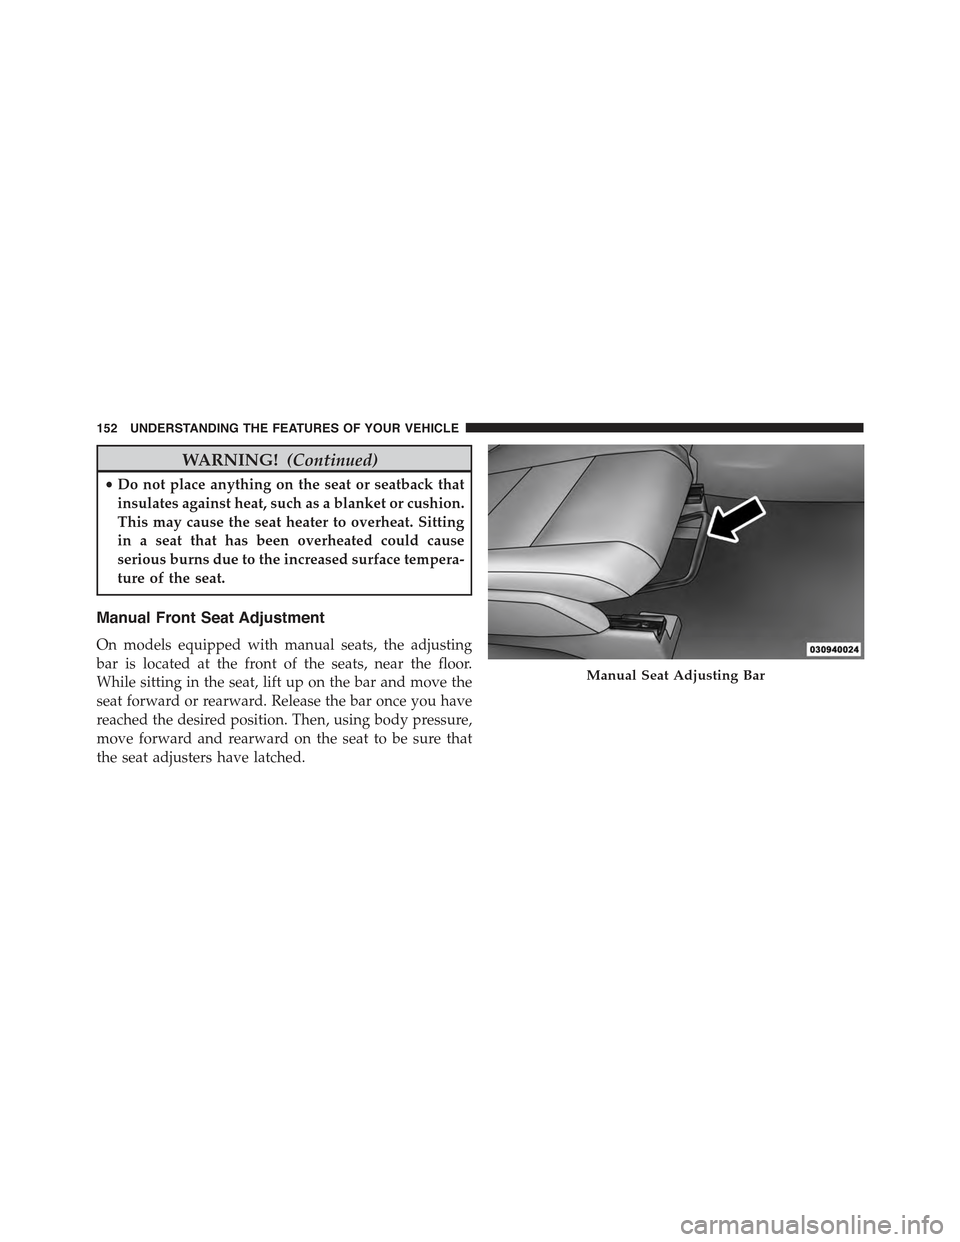 JEEP COMPASS 2015 1.G Owners Manual WARNING!(Continued)
•Do not place anything on the seat or seatback that
insulates against heat, such as a blanket or cushion.
This may cause the seat heater to overheat. Sitting
in a seat that has b